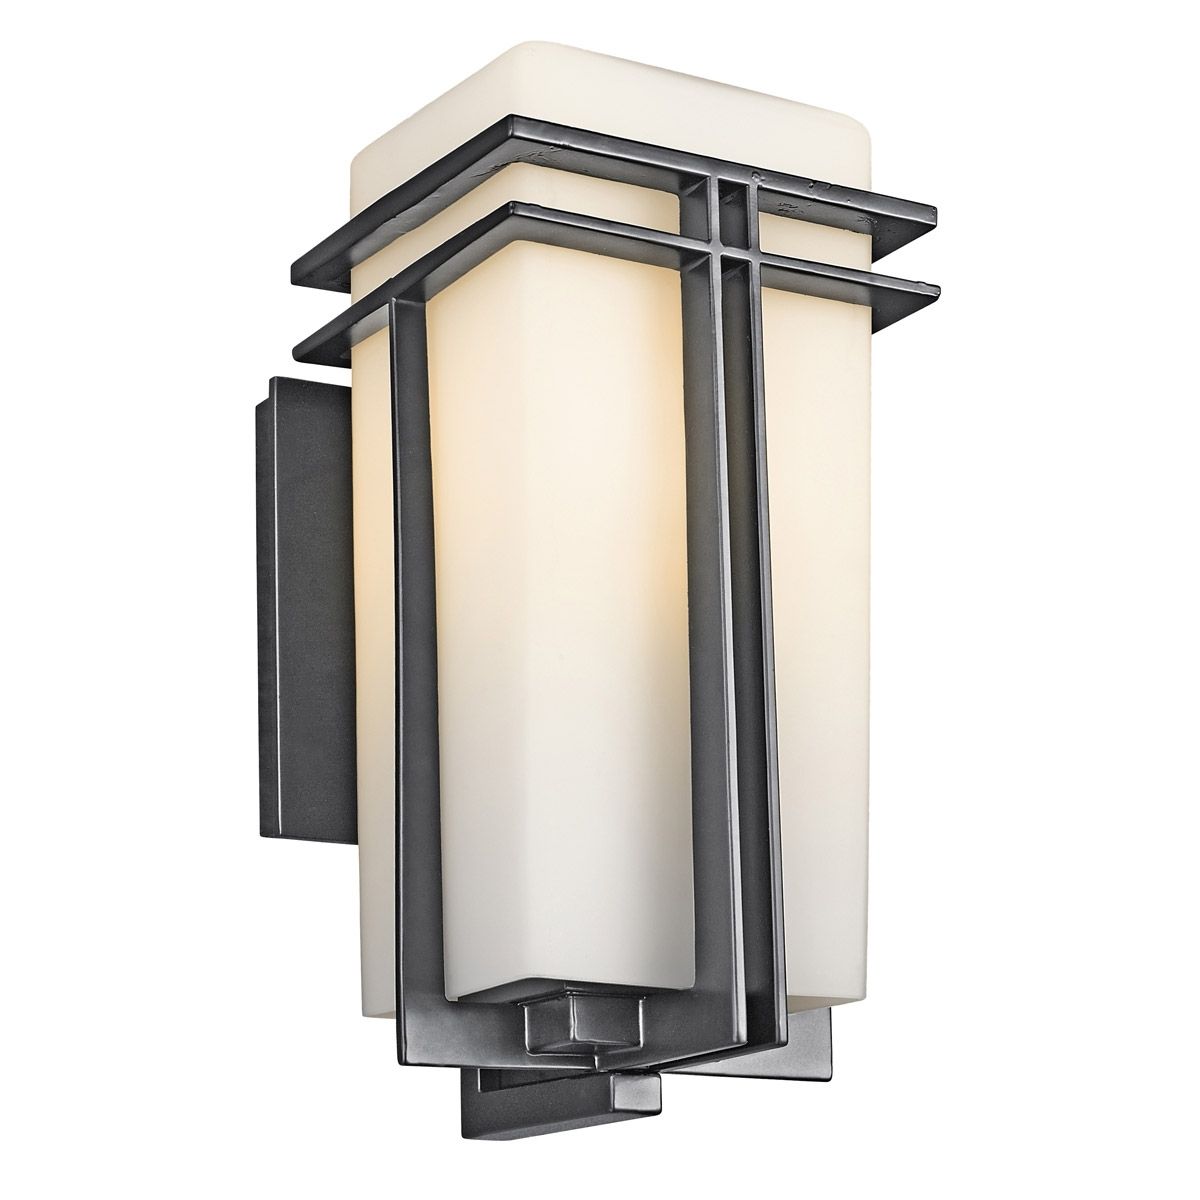 Modern Outdoor Wall Lights: 21 Extraordinary Outdoor Wall Lighting Pertaining To Contemporary Outdoor Wall Lighting Sconces (View 11 of 15)